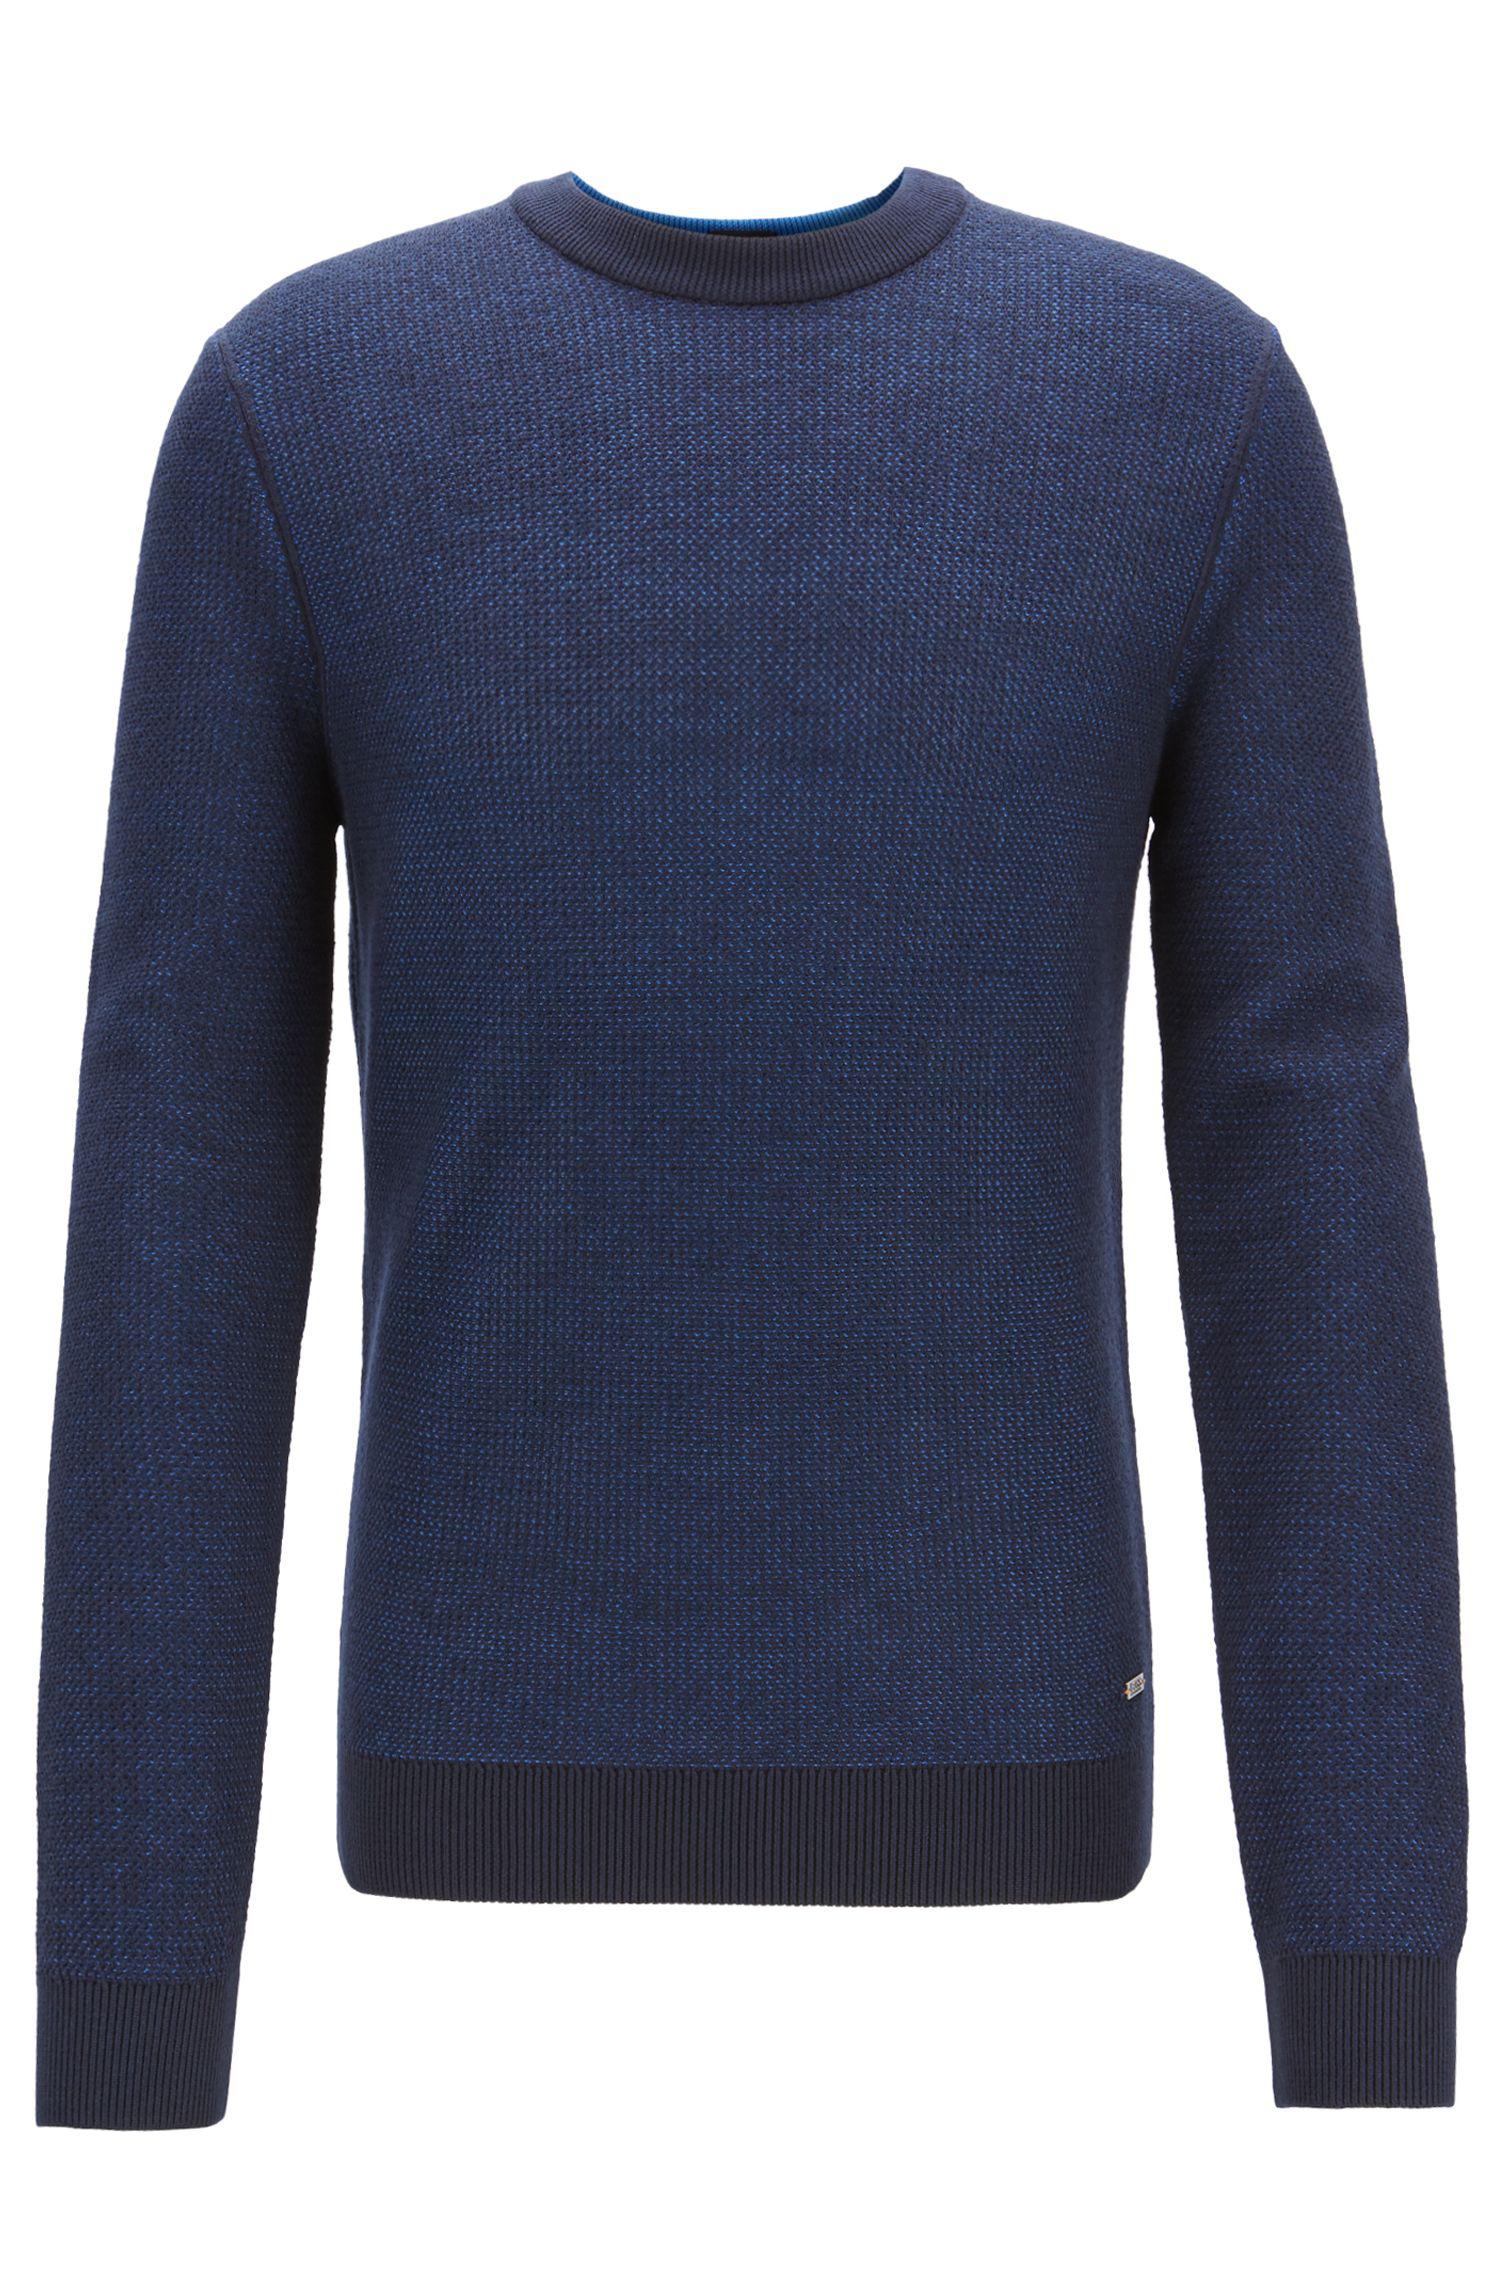 Lyst - BOSS Crew-neck Sweater In Micro-structured Italian Cotton in ...